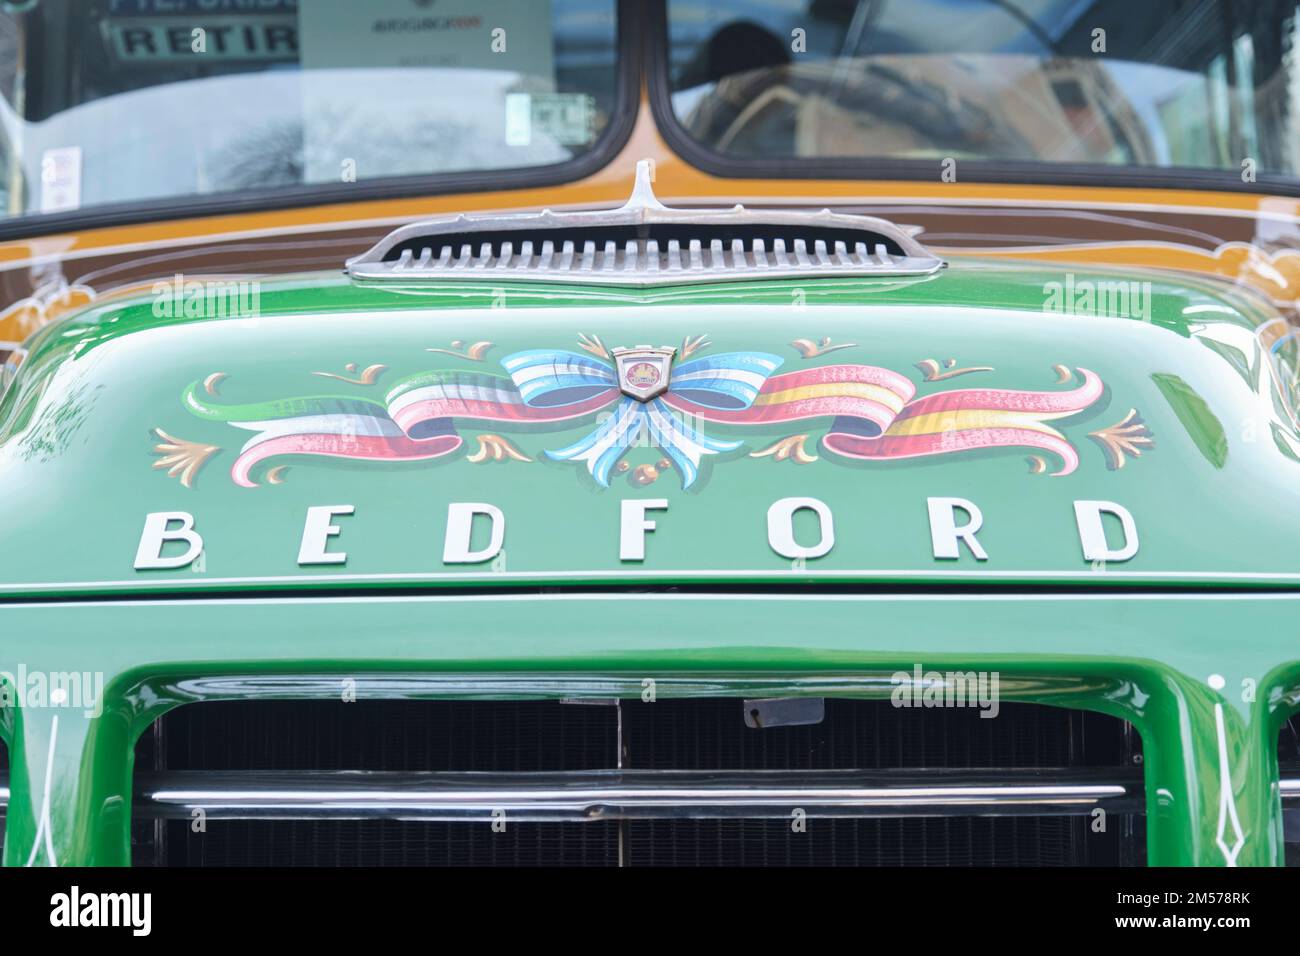 Buenos Aires, Argentina, June 20, 2022: Close up view of the hood of a green Bedford Alcorta 1961, old vintage bus for public transport, line 208, pai Stock Photo